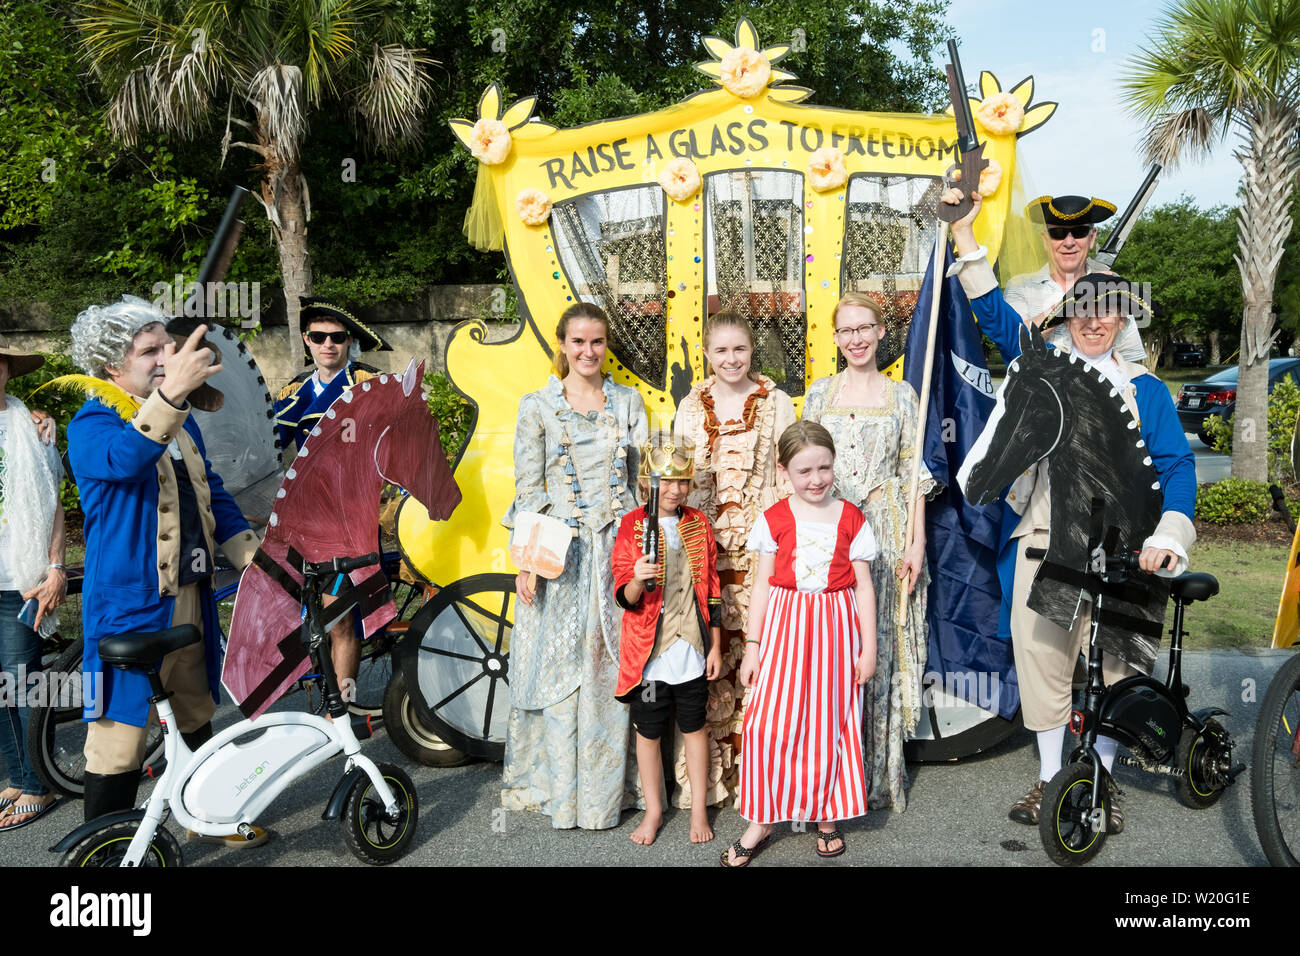 The winners of the annual Independence Day golf cart and bicycle parade pose in front of their Alexander Hamilton themed golf cart in costume July 4, 2019 in Sullivan's Island, South Carolina. The tiny affluent Sea Island beach community across from Charleston holds an outsized golf cart parade featuring more than 75 decorated carts. Stock Photo